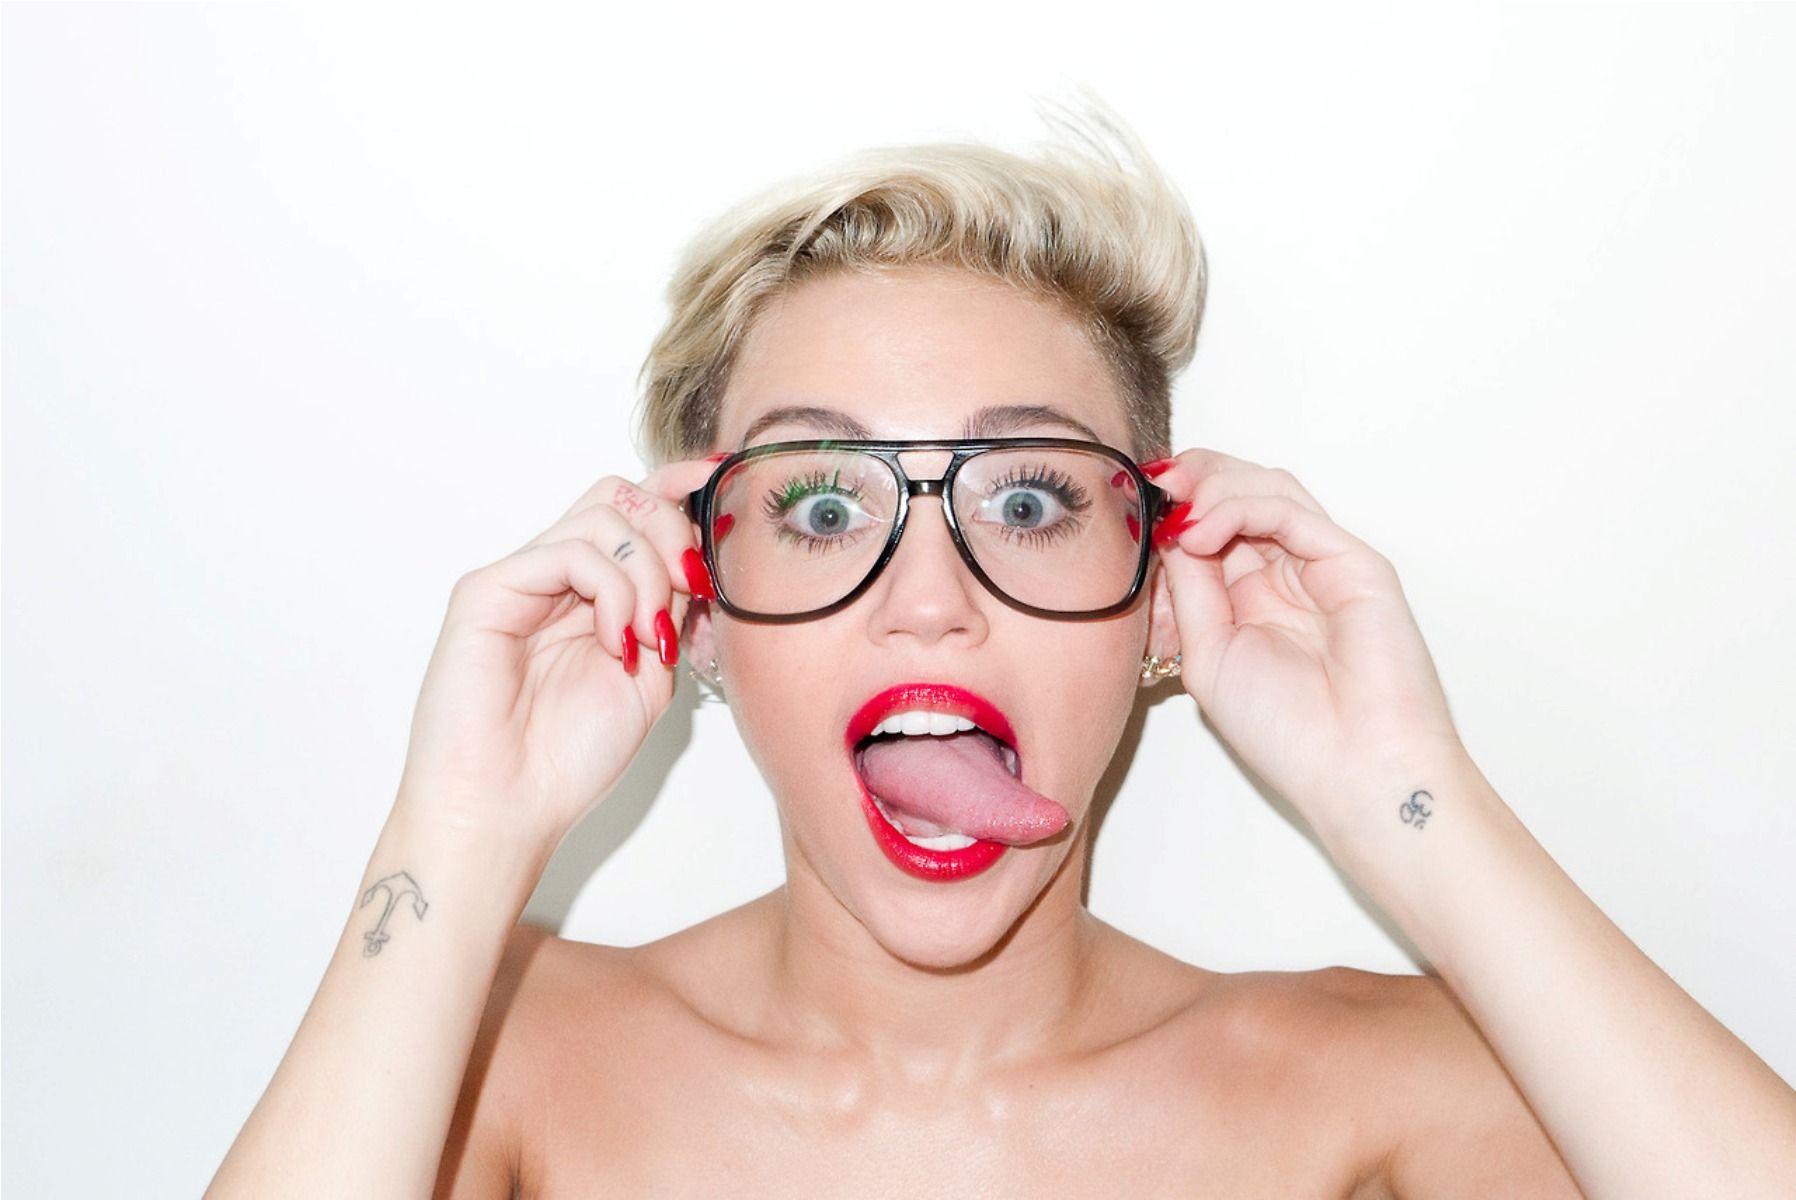 Miley Cyrus Wallpaper, HD Creative Miley Cyrus Picture, Full